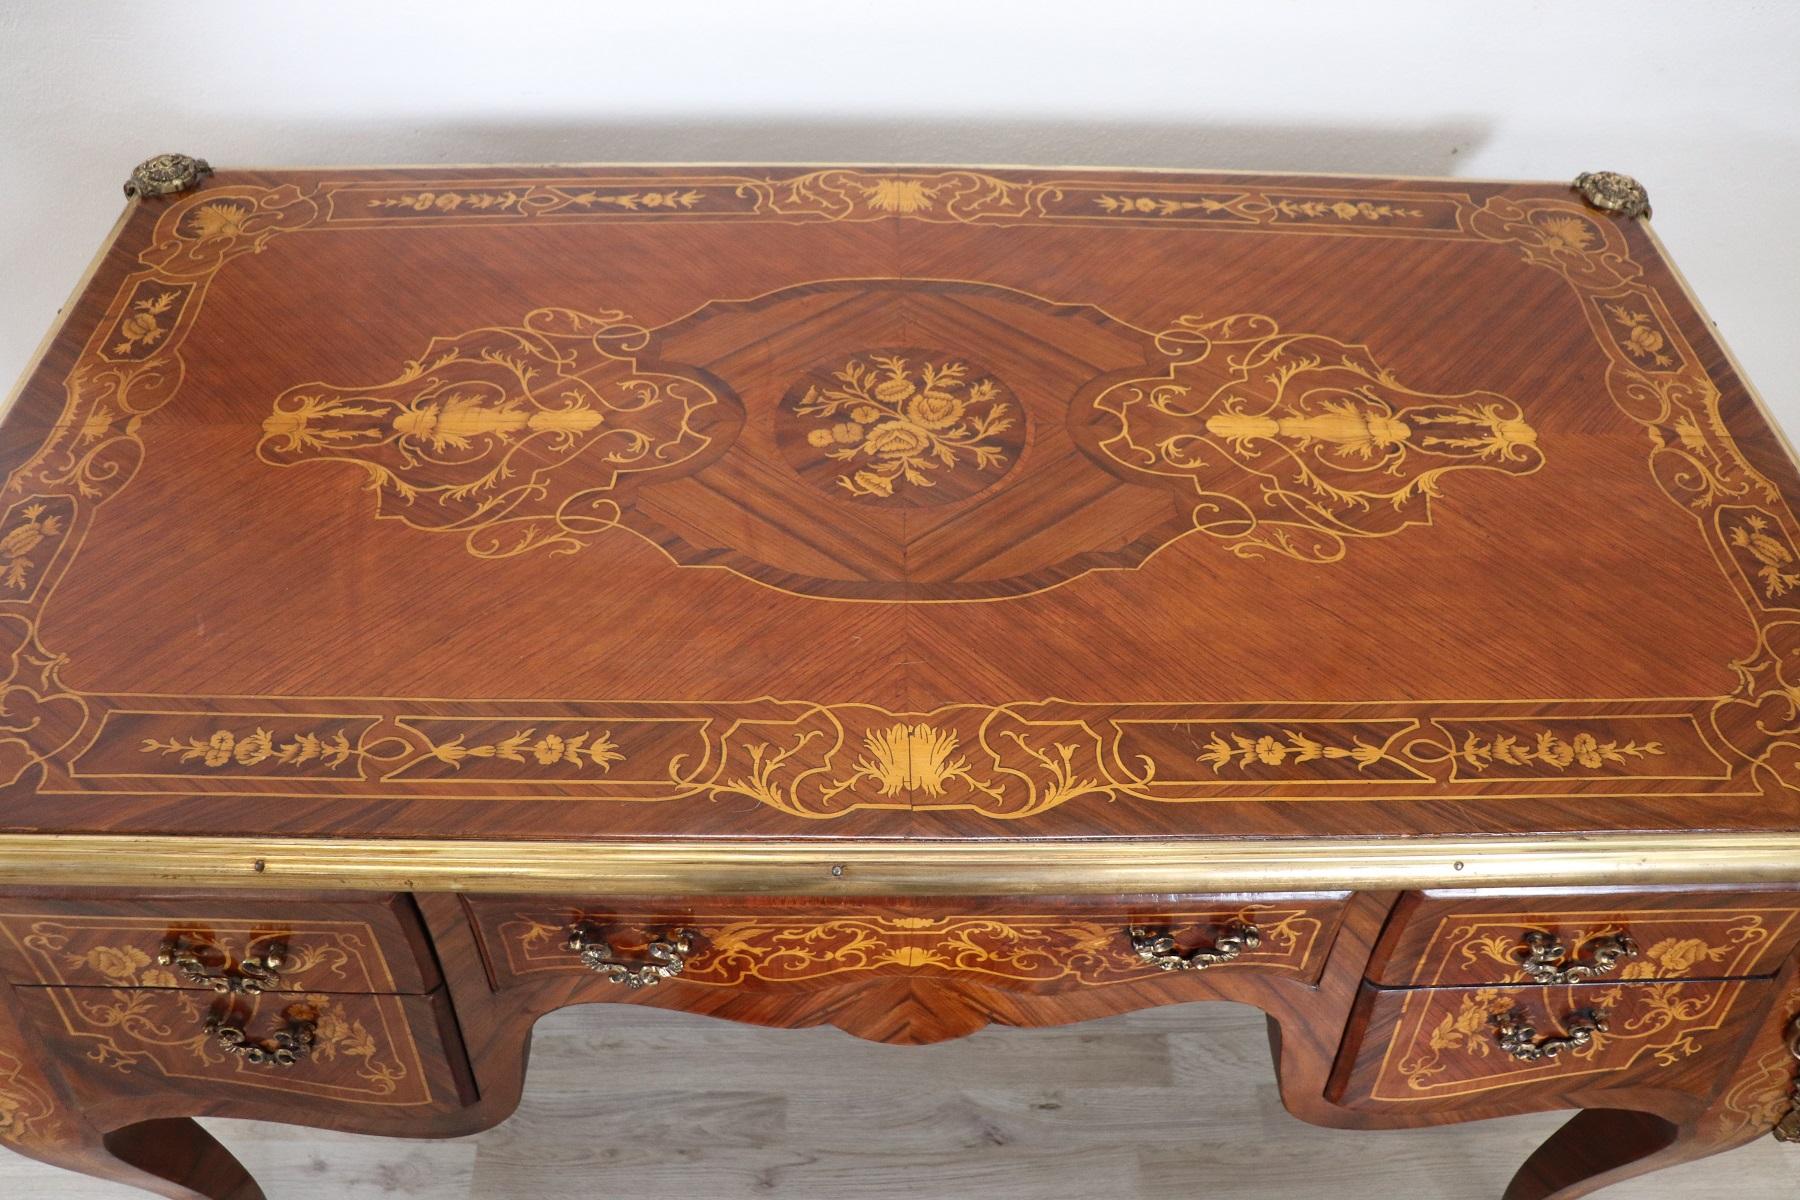 20th Century French Louis XV Style Wood Inlay Golden Bronzes Desk, Writing Table 1